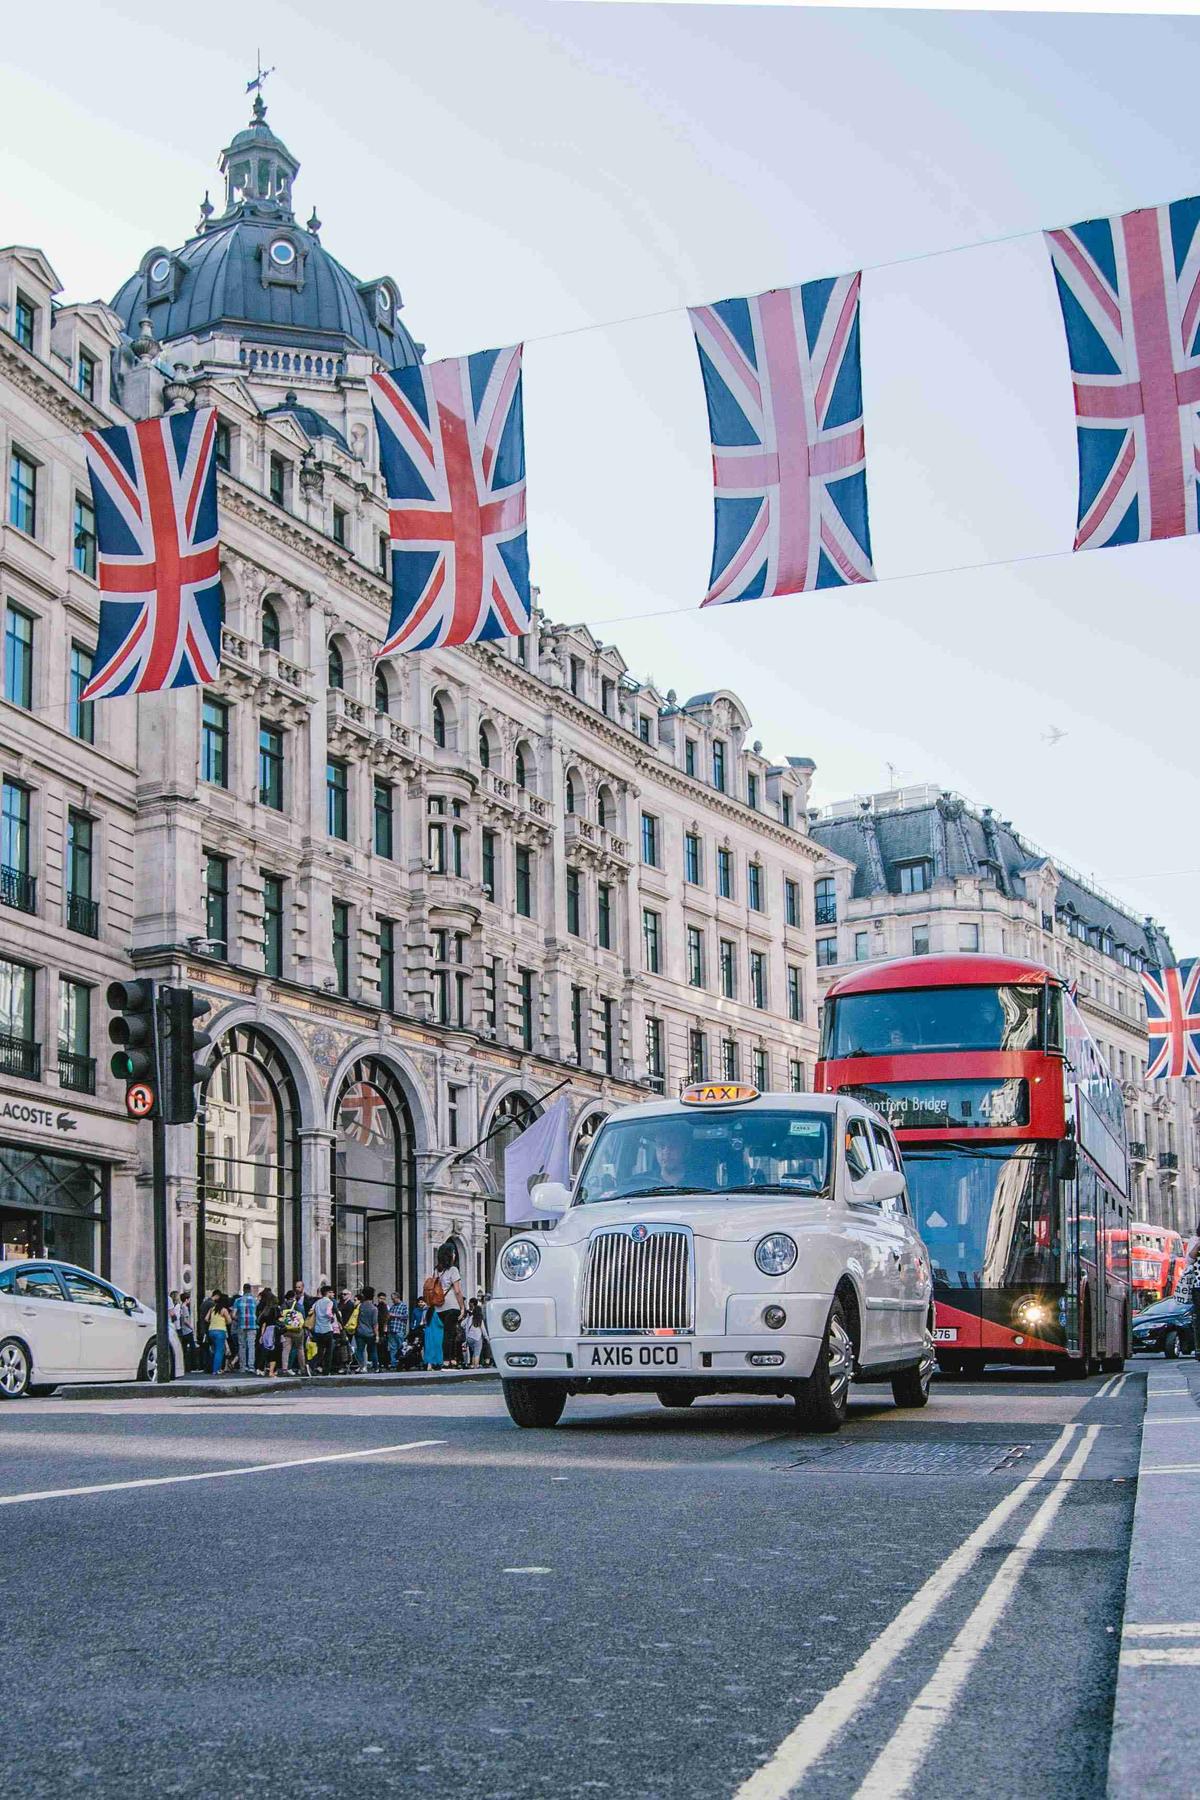 London Street Scene with Bus Taxi and Union Jack Flags